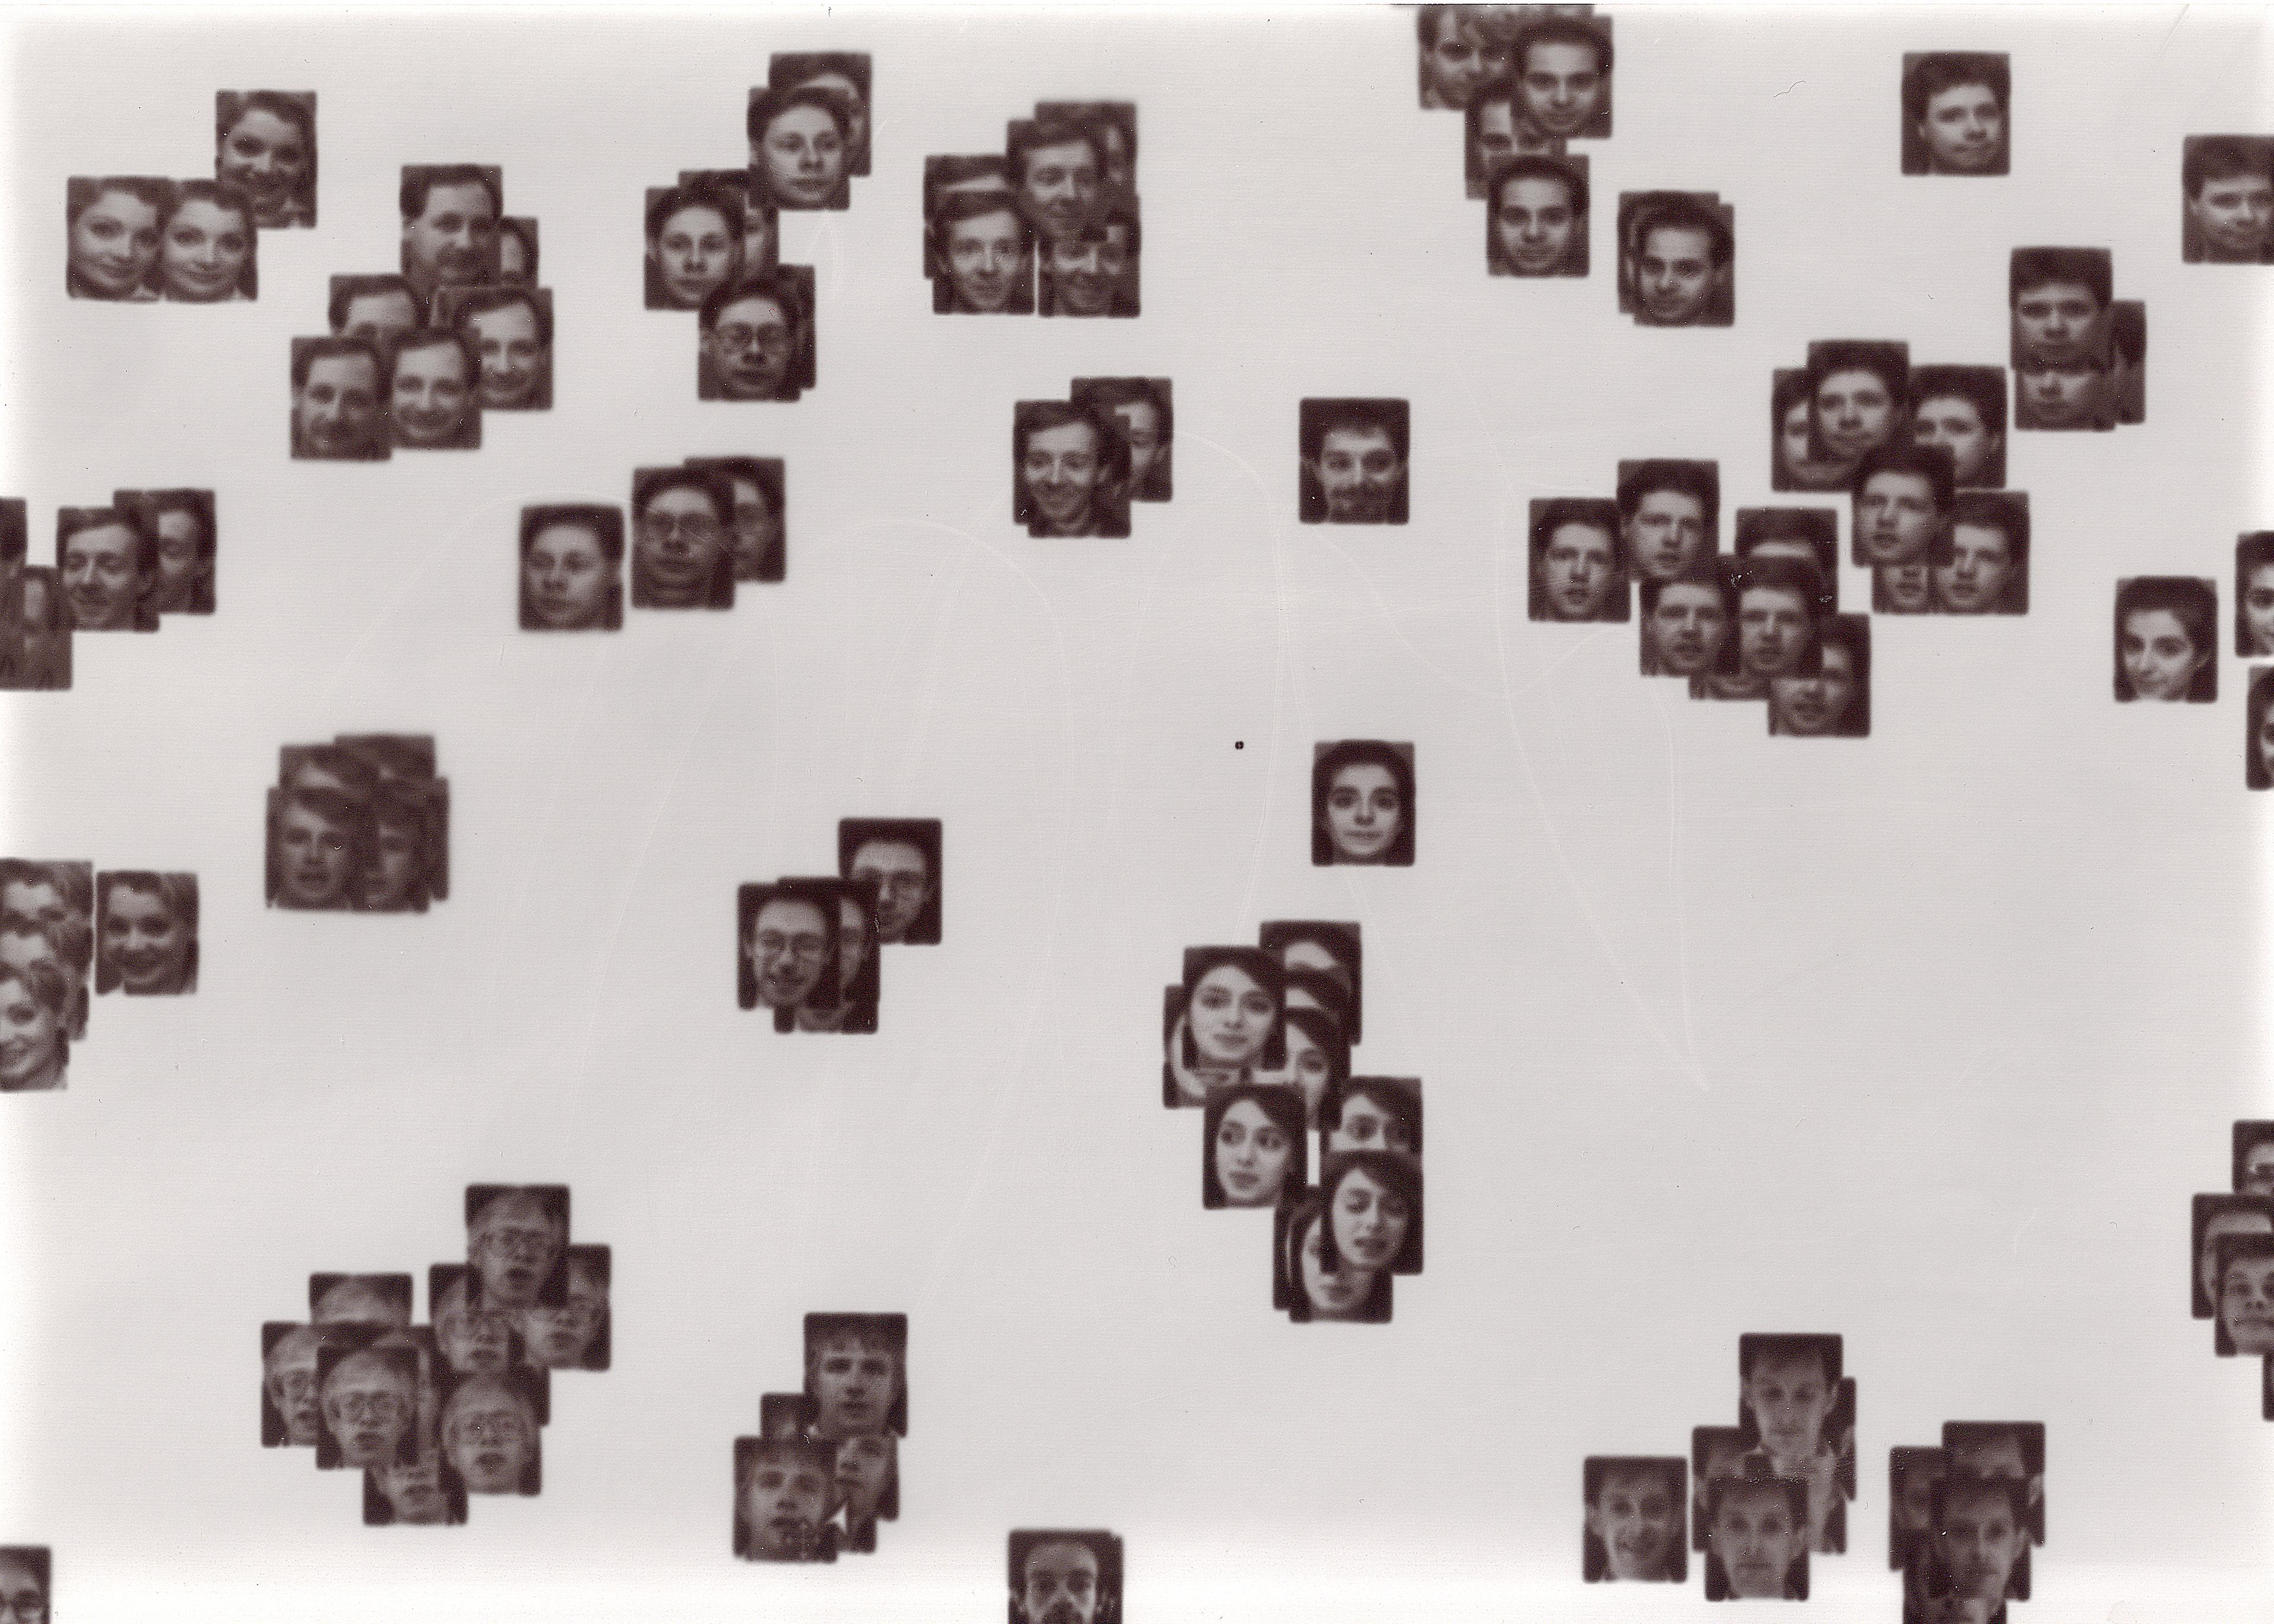 A laptopogram based on a neutral background and populated by scattered squared portraits, all monochromatic, grouped according to similarity. The groupings vary in size, ranging from single faces to overlapping collections of up to twelve. The facial expressions of all the individuals featured are neutral, represented through a mixture of ages and genders.